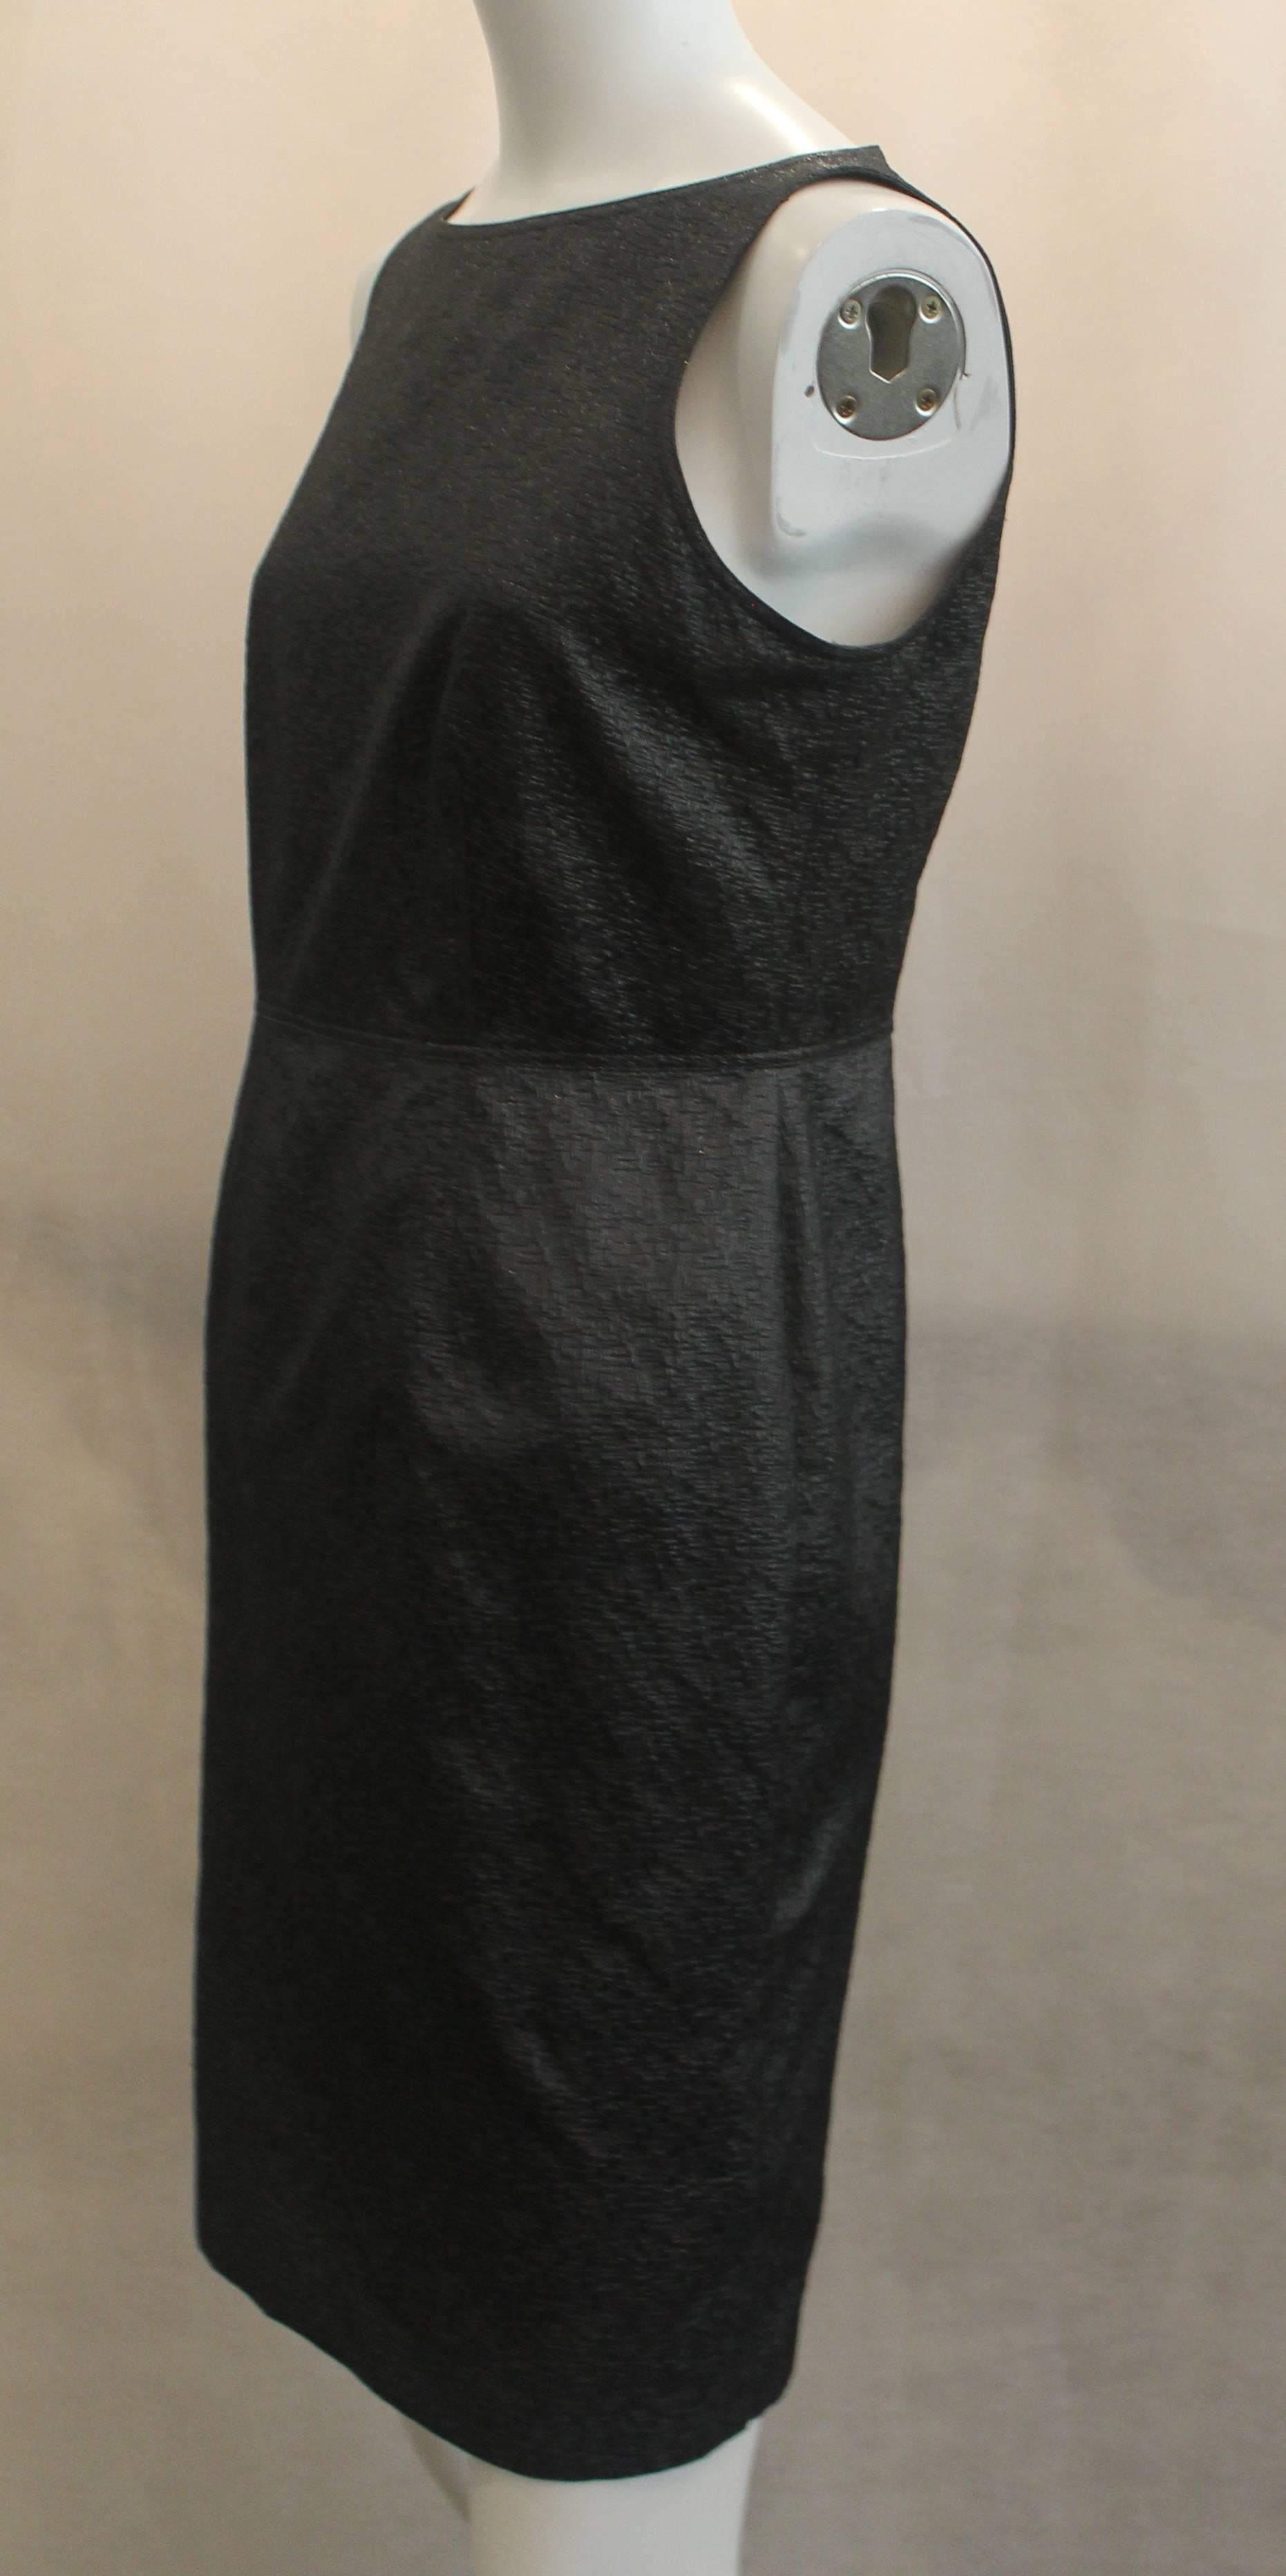 Burberry Sleeveless Fitted Metallic Charcoal Colored Polyester Brocade Dress - 6. This beautiful dress is a metallic charcoal color. It is made of polyester brocade. This dress features a sleeveless, fitted design with a slit in the back.
It is in